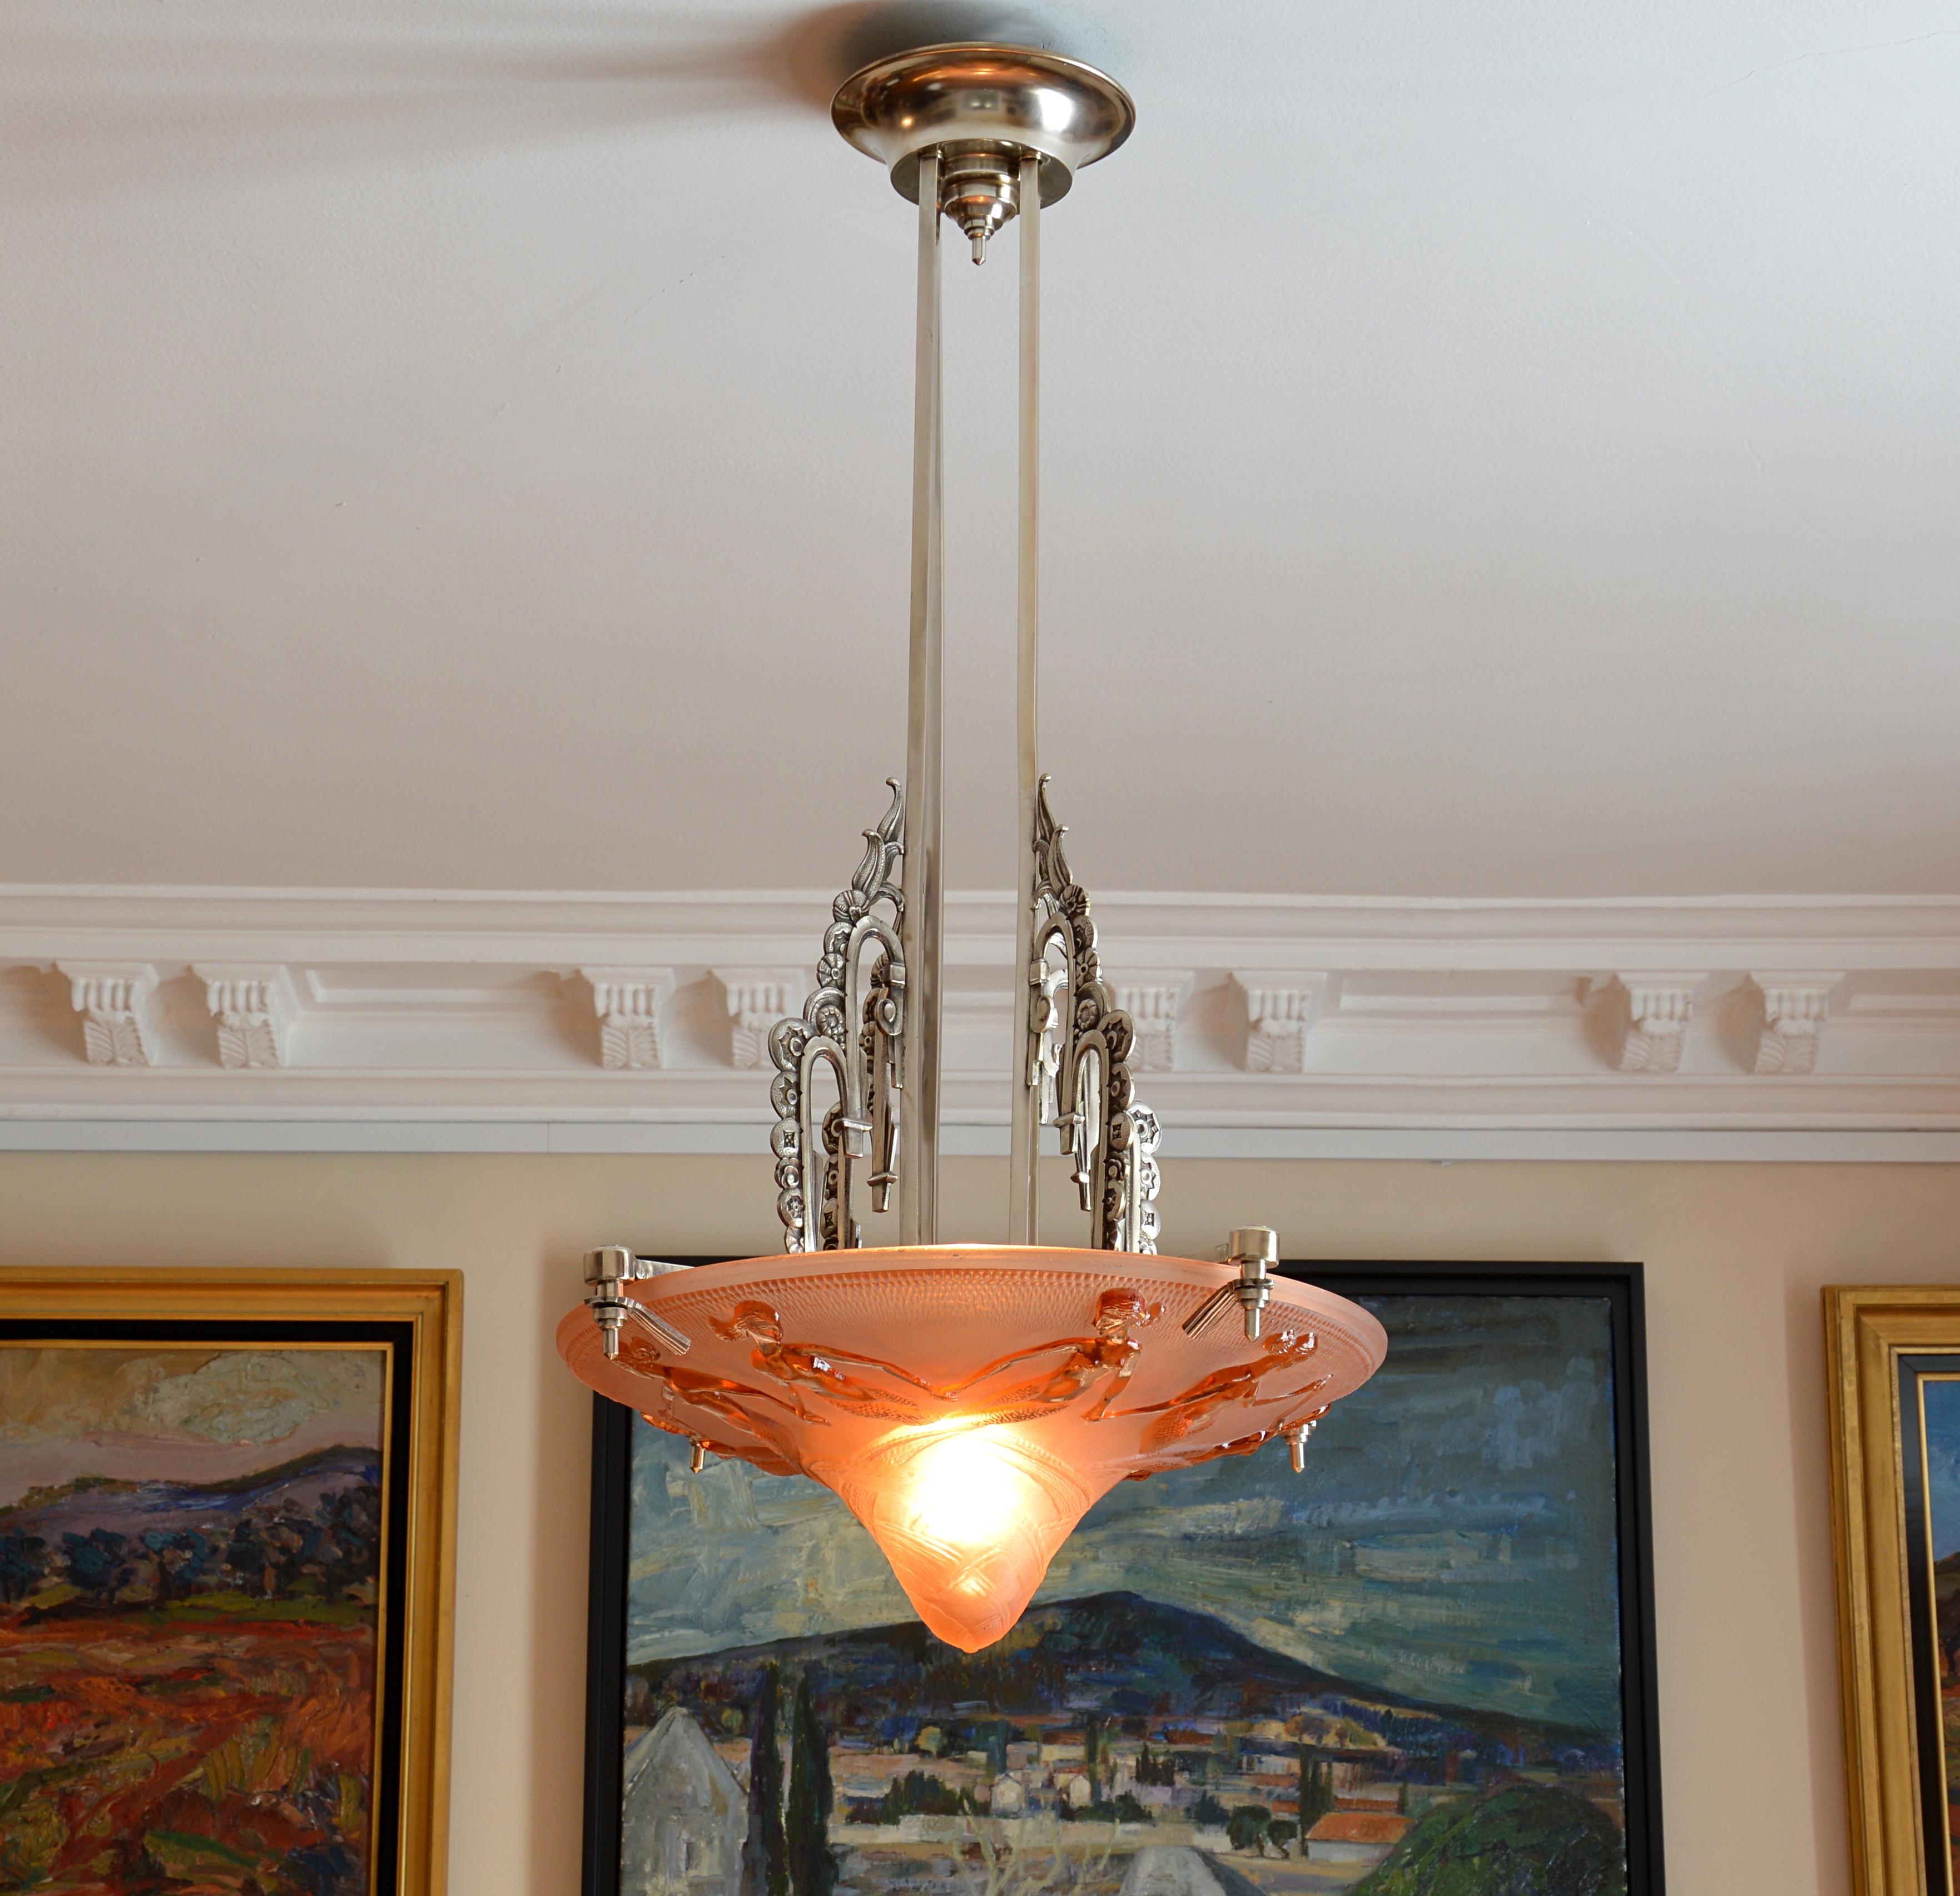 French Art Deco pendant chandelier by Maurice Model, Verdun, France, 1930s. Very thick molded-pressed glass bowl with a pattern of a round of eight mermaid in relief suspended on a silver plated bronze and brass fixture representing a Cascade of